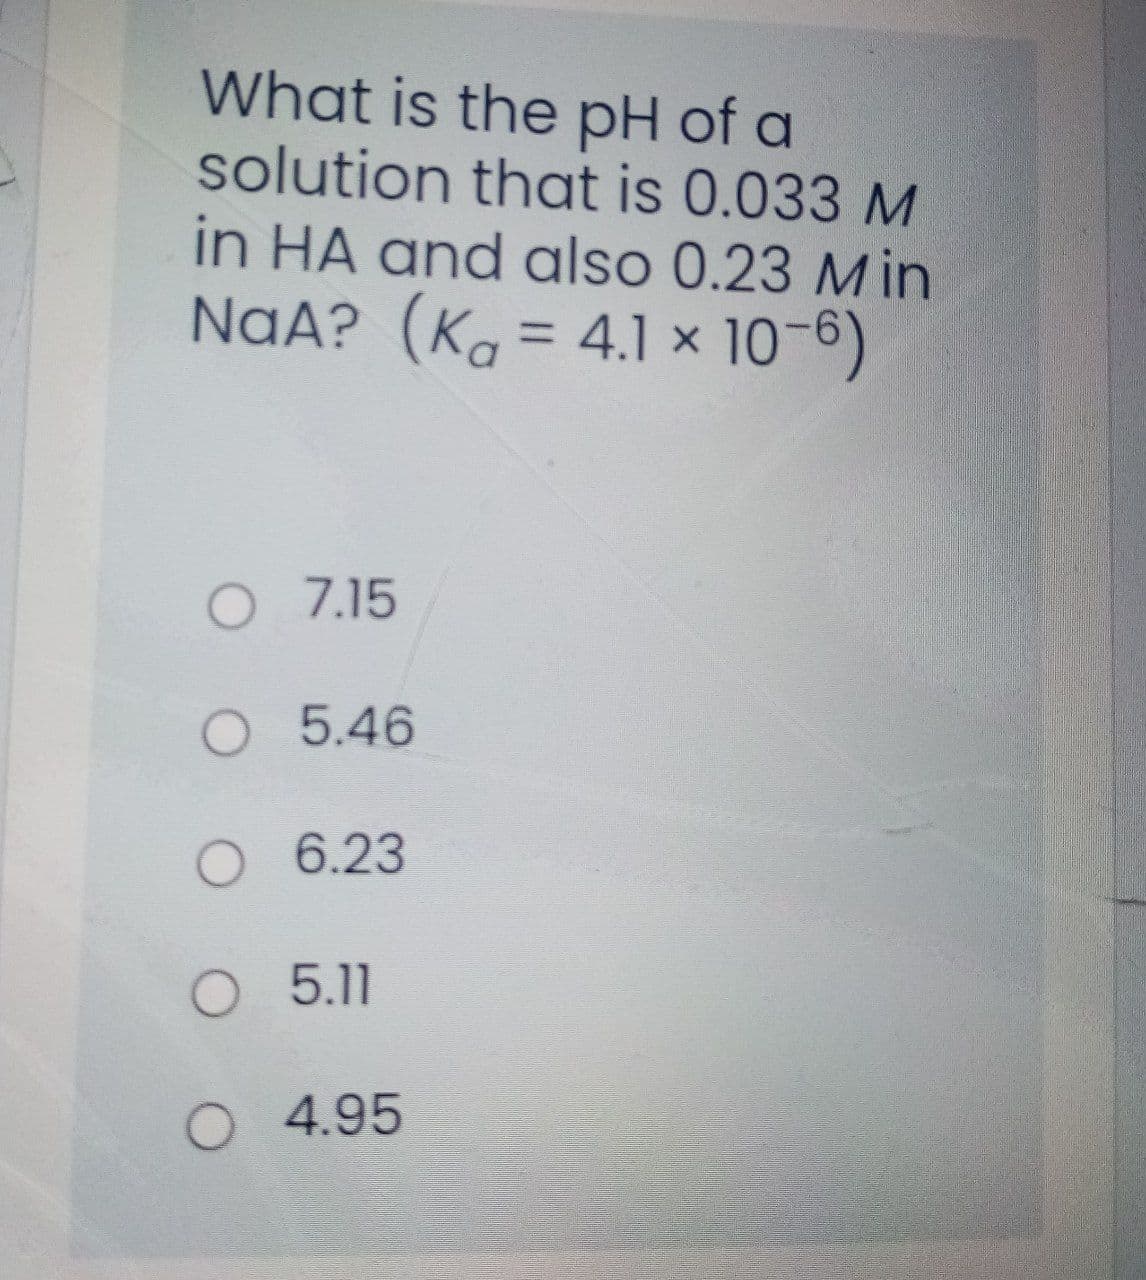 What is the pH of a
solution that is 0.033 M
in HA and also 0.23 Min
NaA? (K. = 4.1 × 10-6)
%3D
O 7.15
5.46
O 6.23
O 5.11
O 4.95
